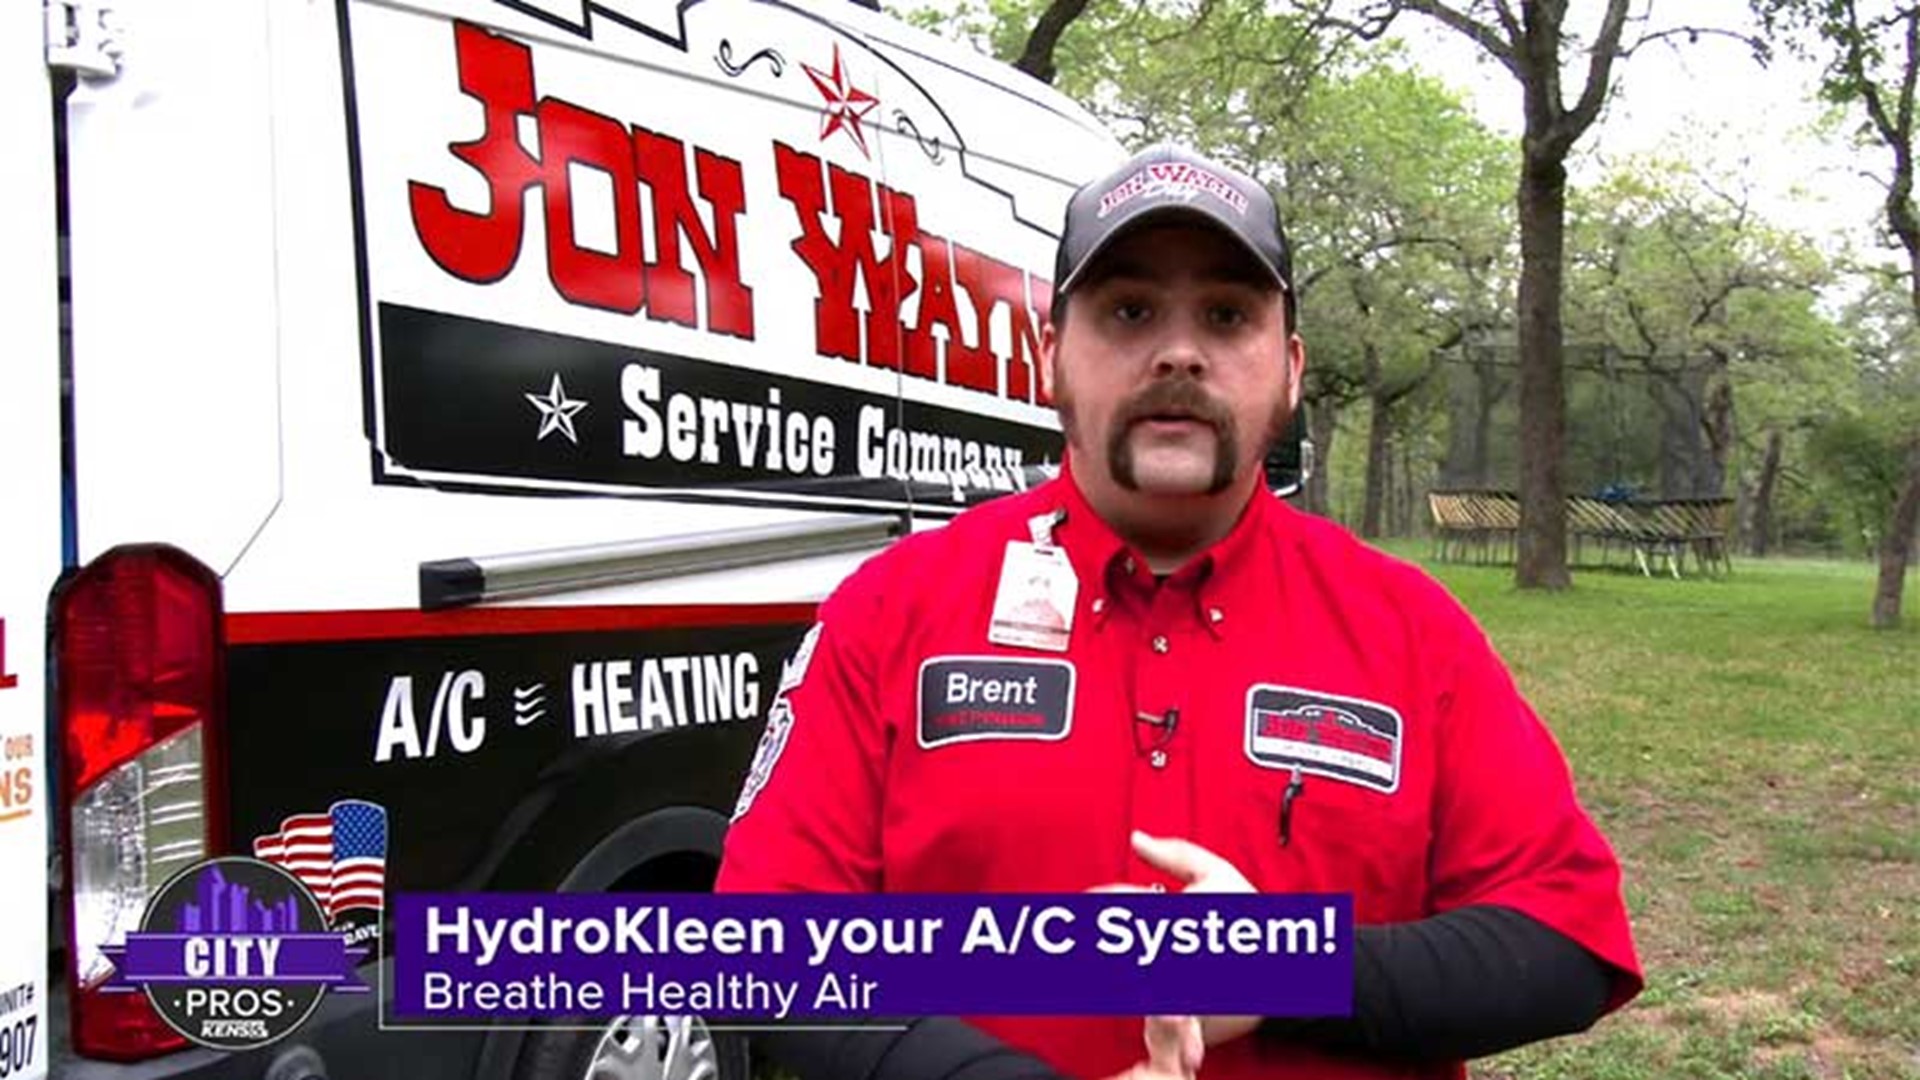 Jon Wayne Service Company uses the HydroKleen process on the indoor coil, bore wheel and outdoor condensing unit to remove microbial growth inside A/C systems.